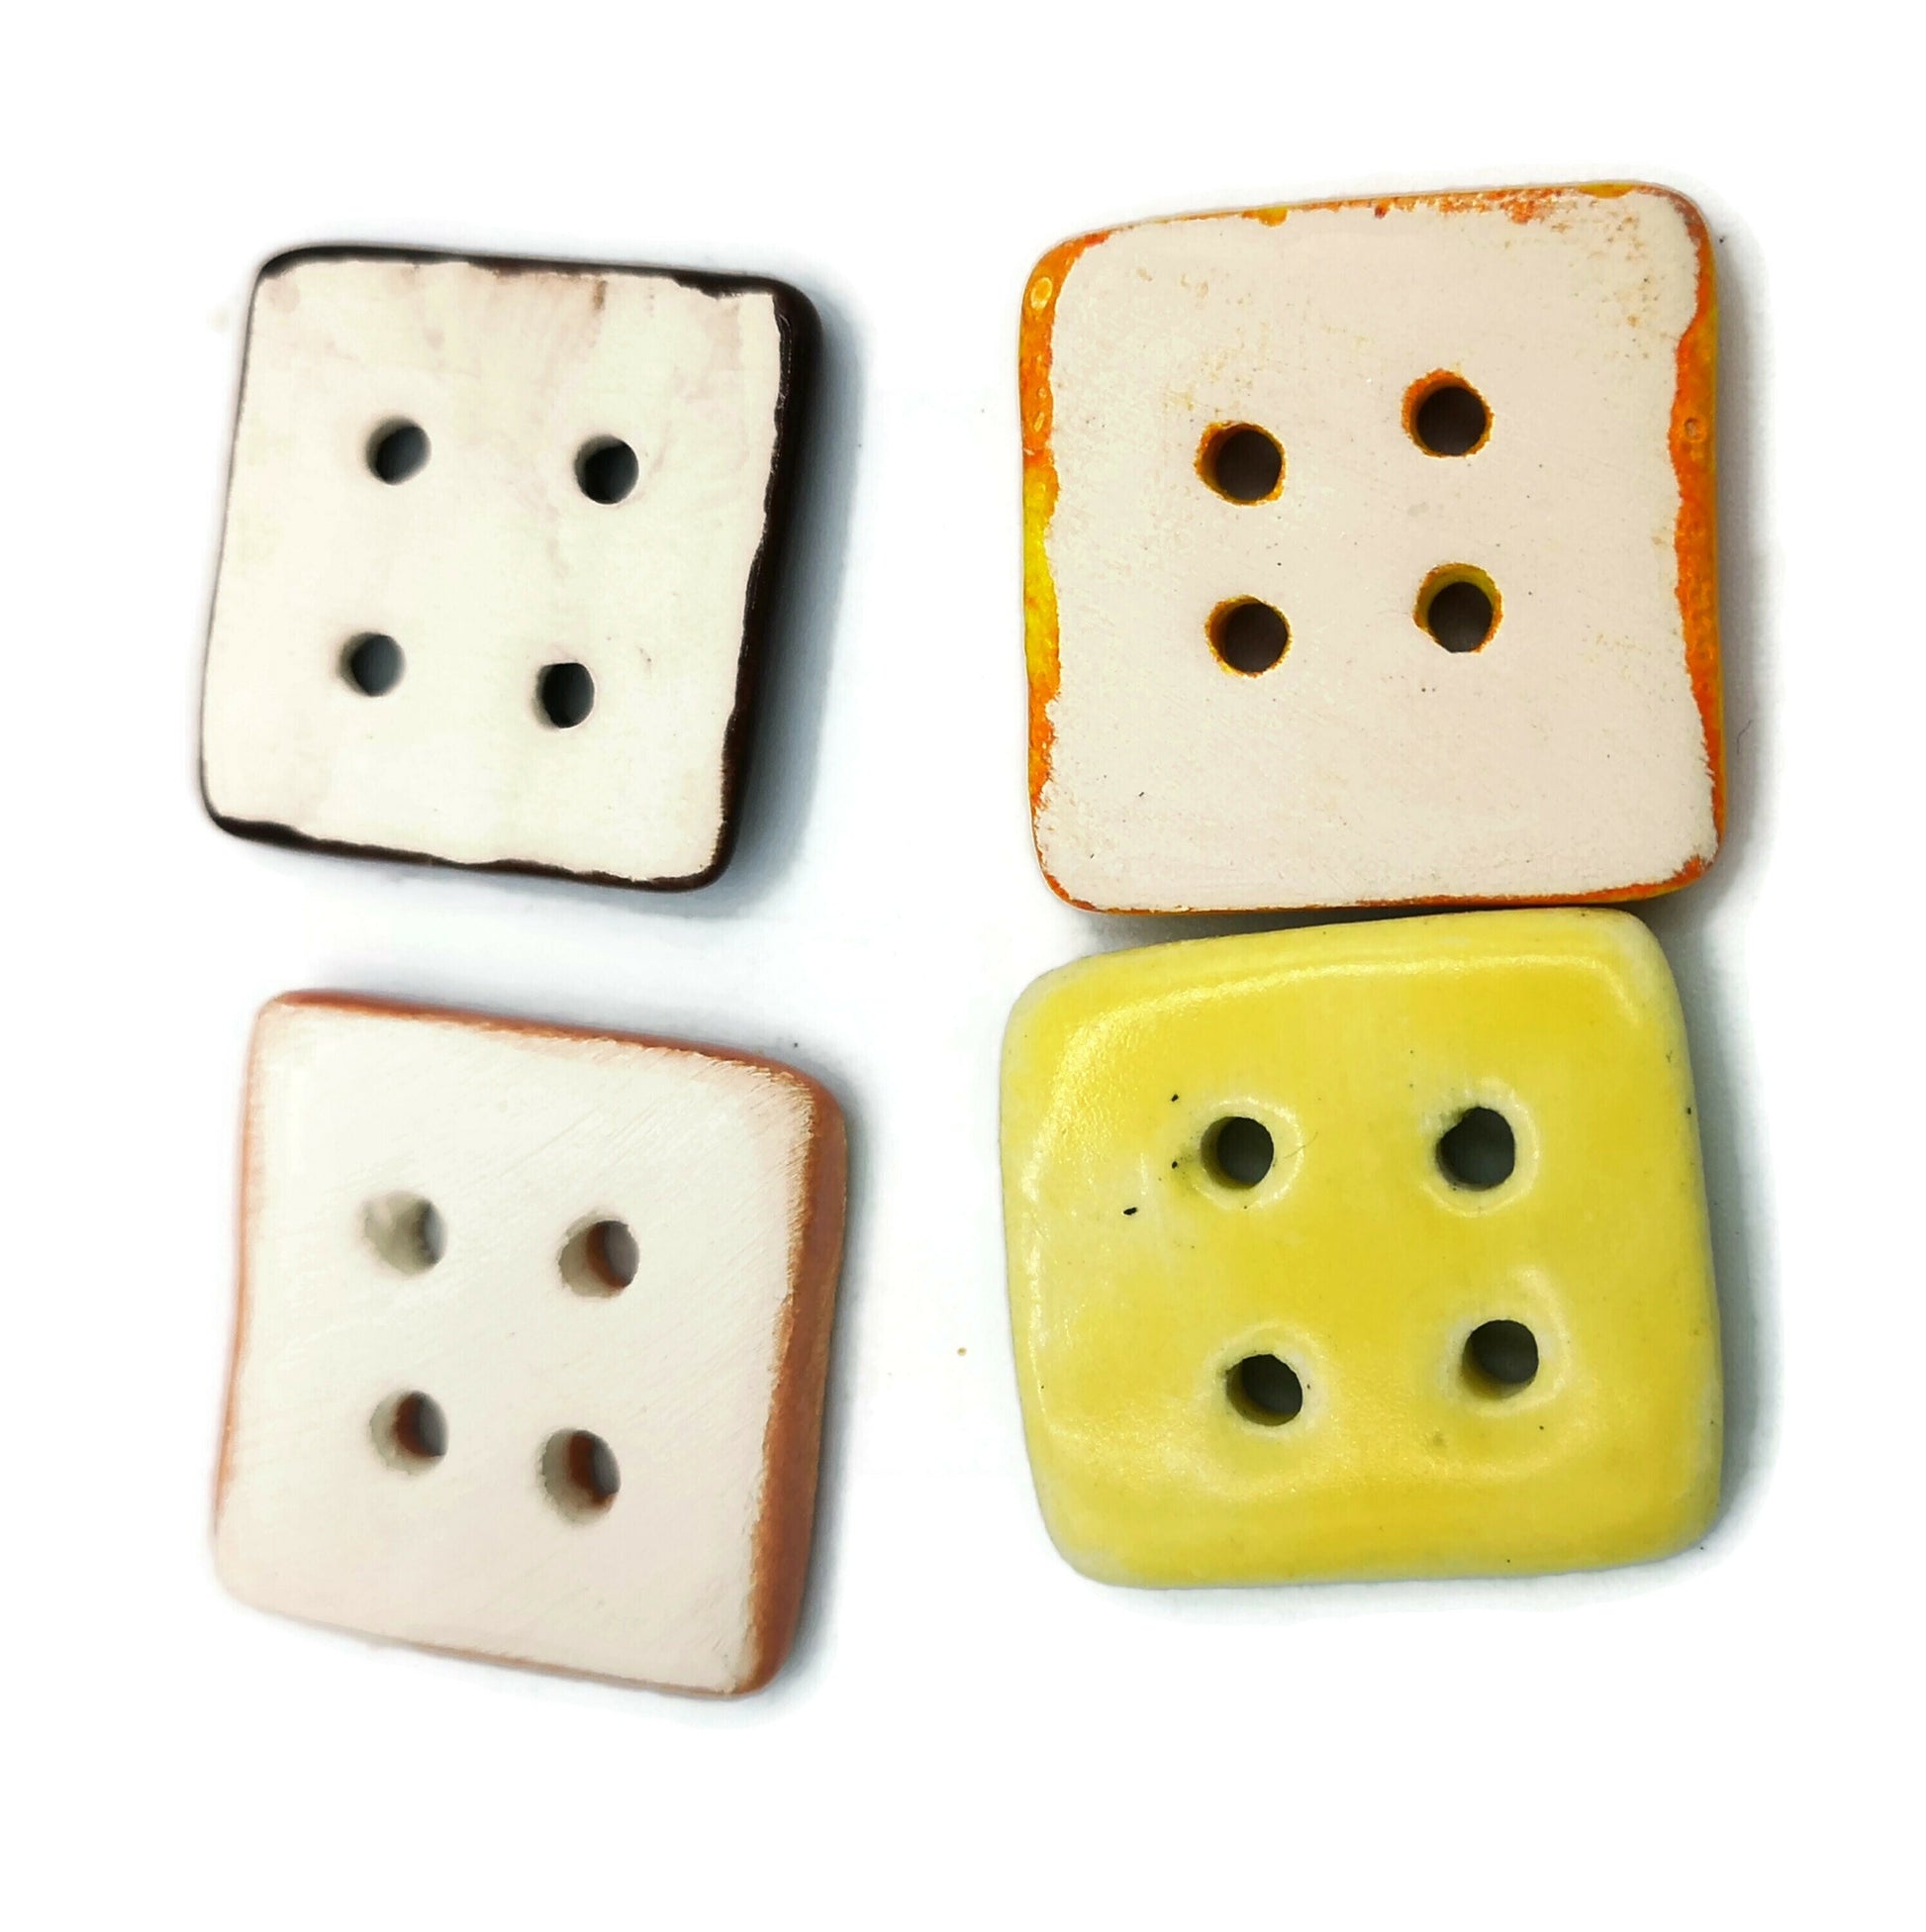 Coat buttons, Set Of 4 colorful button beads, large square buttons lot, cute sewing buttons trending now, best sellers buttons for crafts - Ceramica Ana Rafael